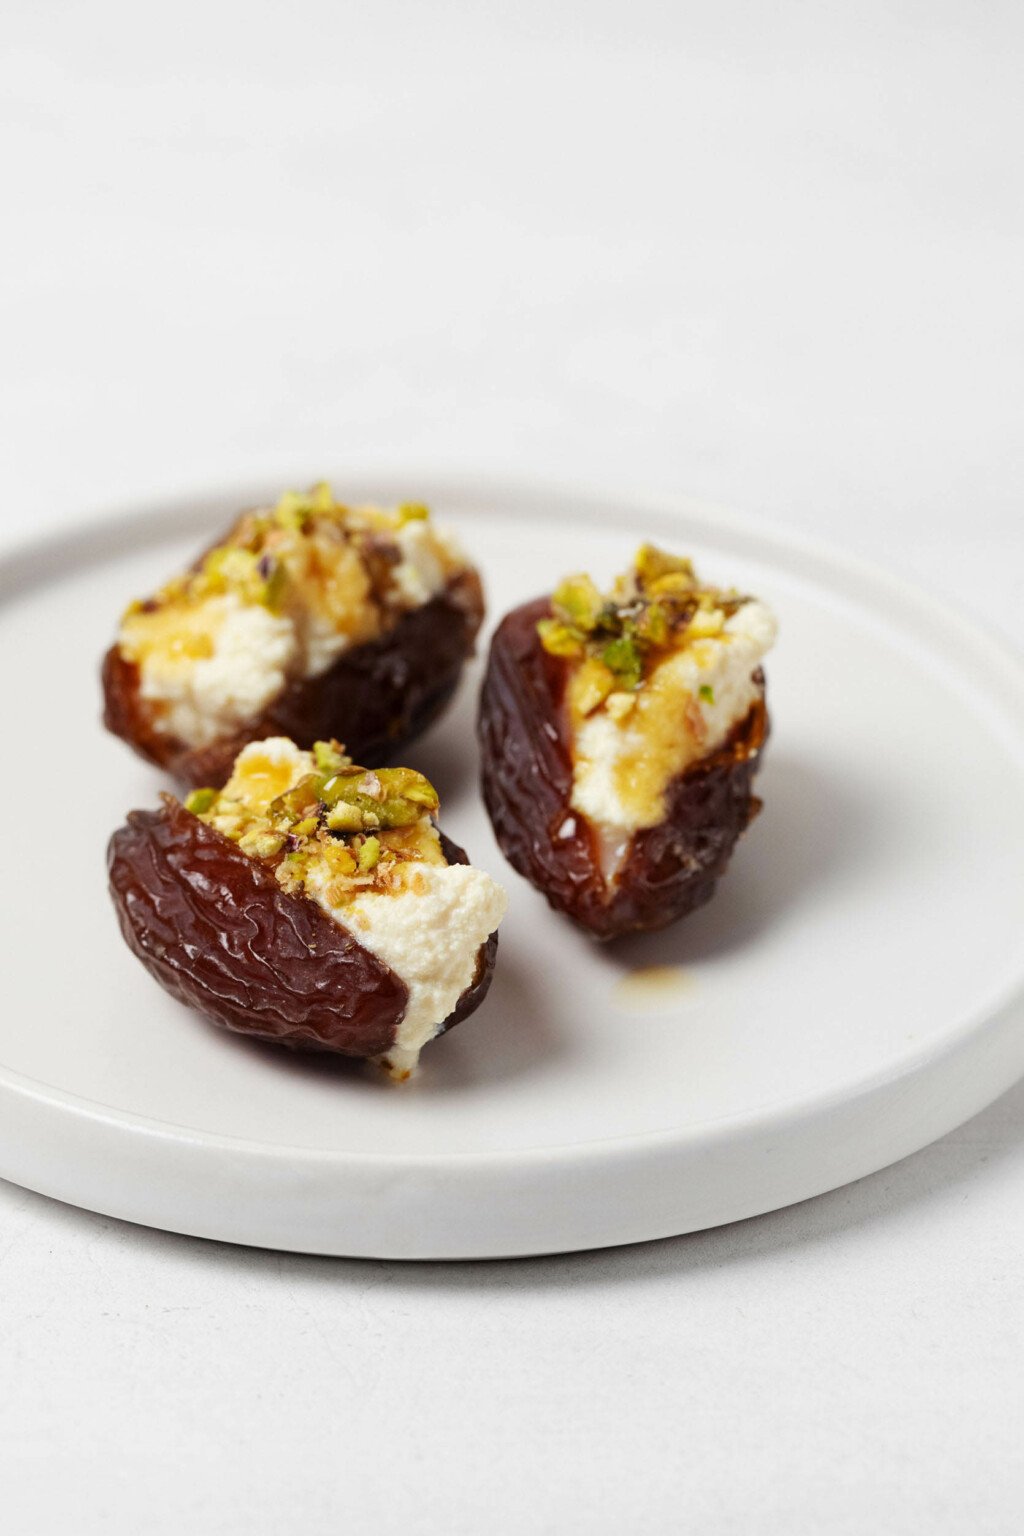 Three dates, which have been stuffed with a plant-based cashew cheese, are resting on a round, white rimmed appetizer plate.